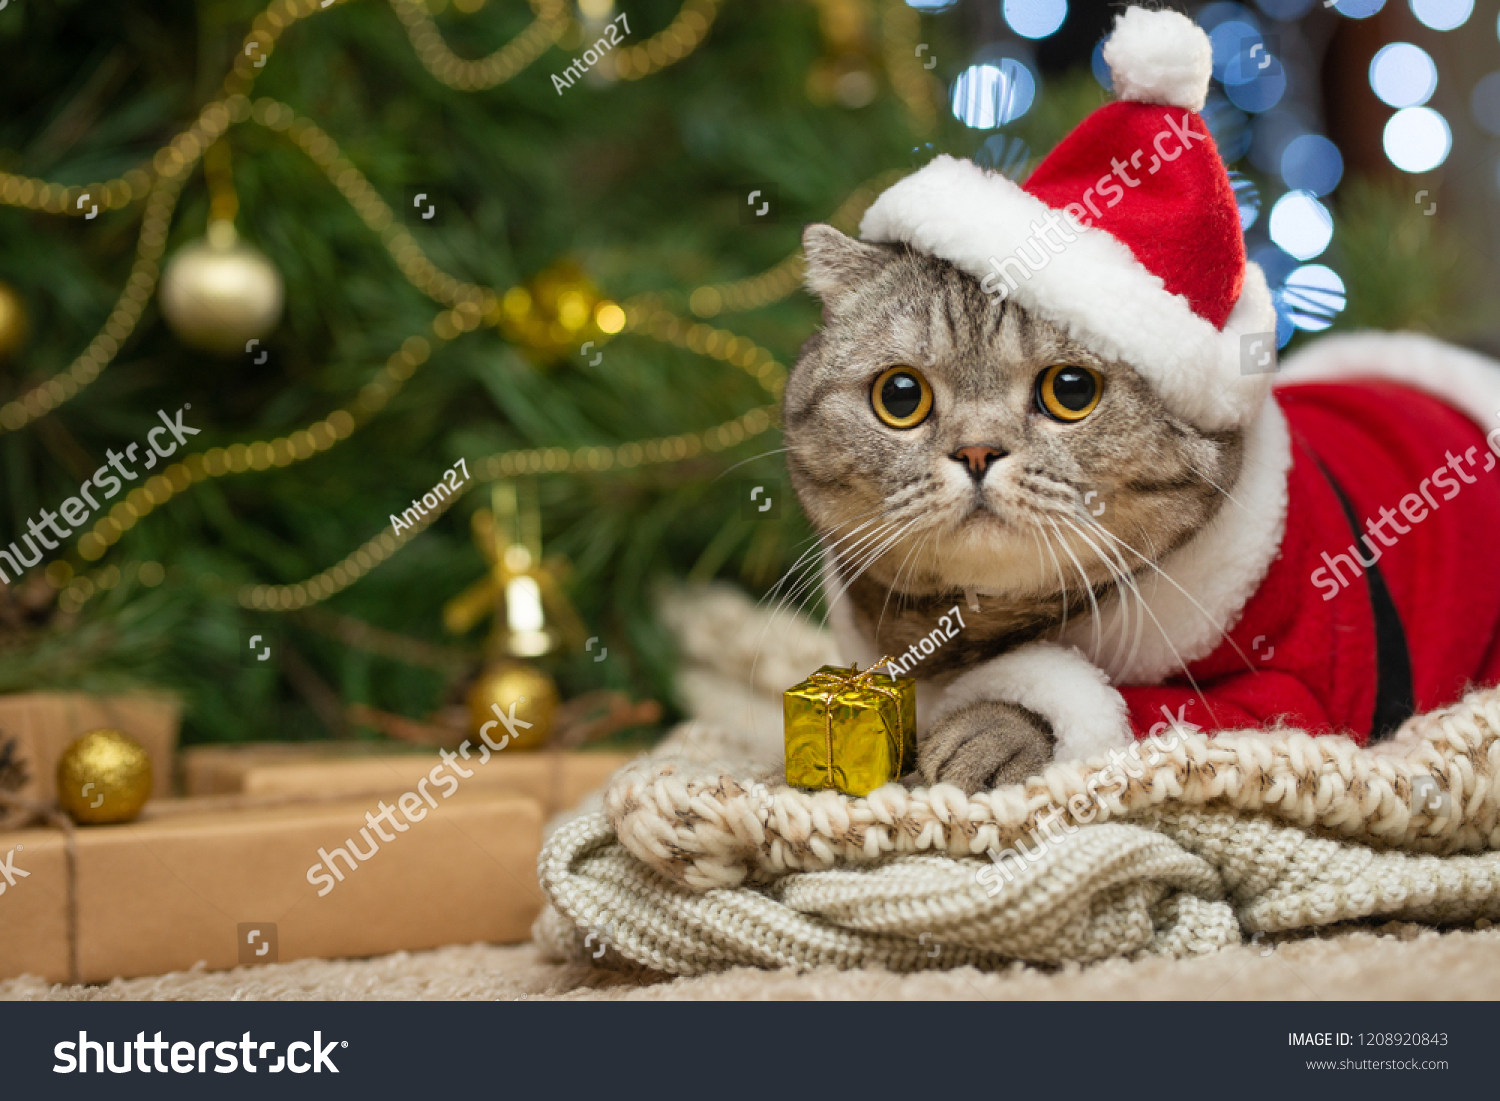 Tabby and the happy cat. Christmas season 2018, new year, holidays and holidays #1208920843